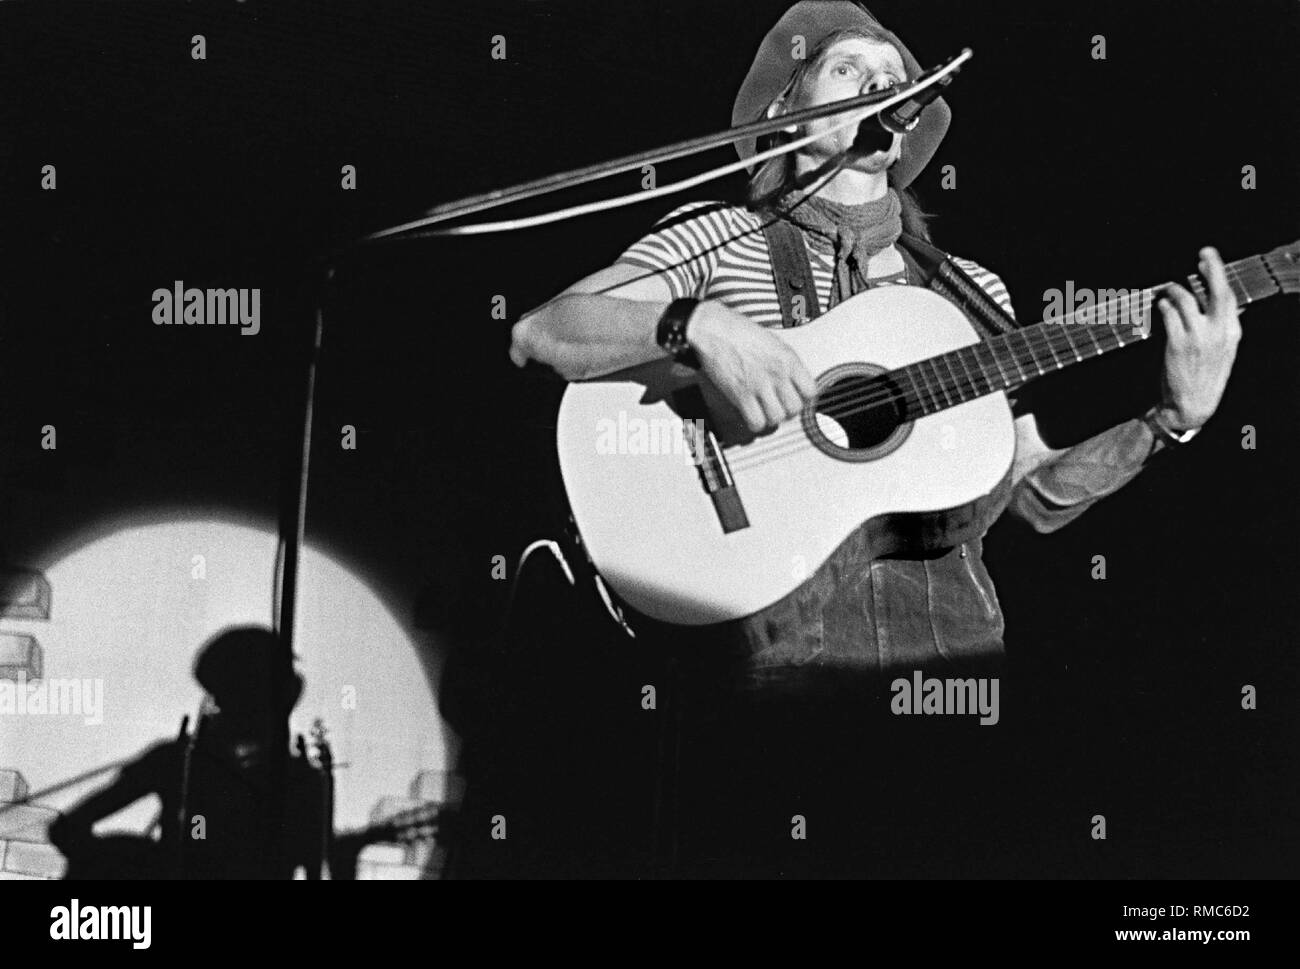 Gerhard Gundermann and band, Concert at the Literaturfest (Literary Festival) in the Congress Hall at Alexanderplatz, Germany, Berlin-Mitte, 29.11.1987. Stock Photo